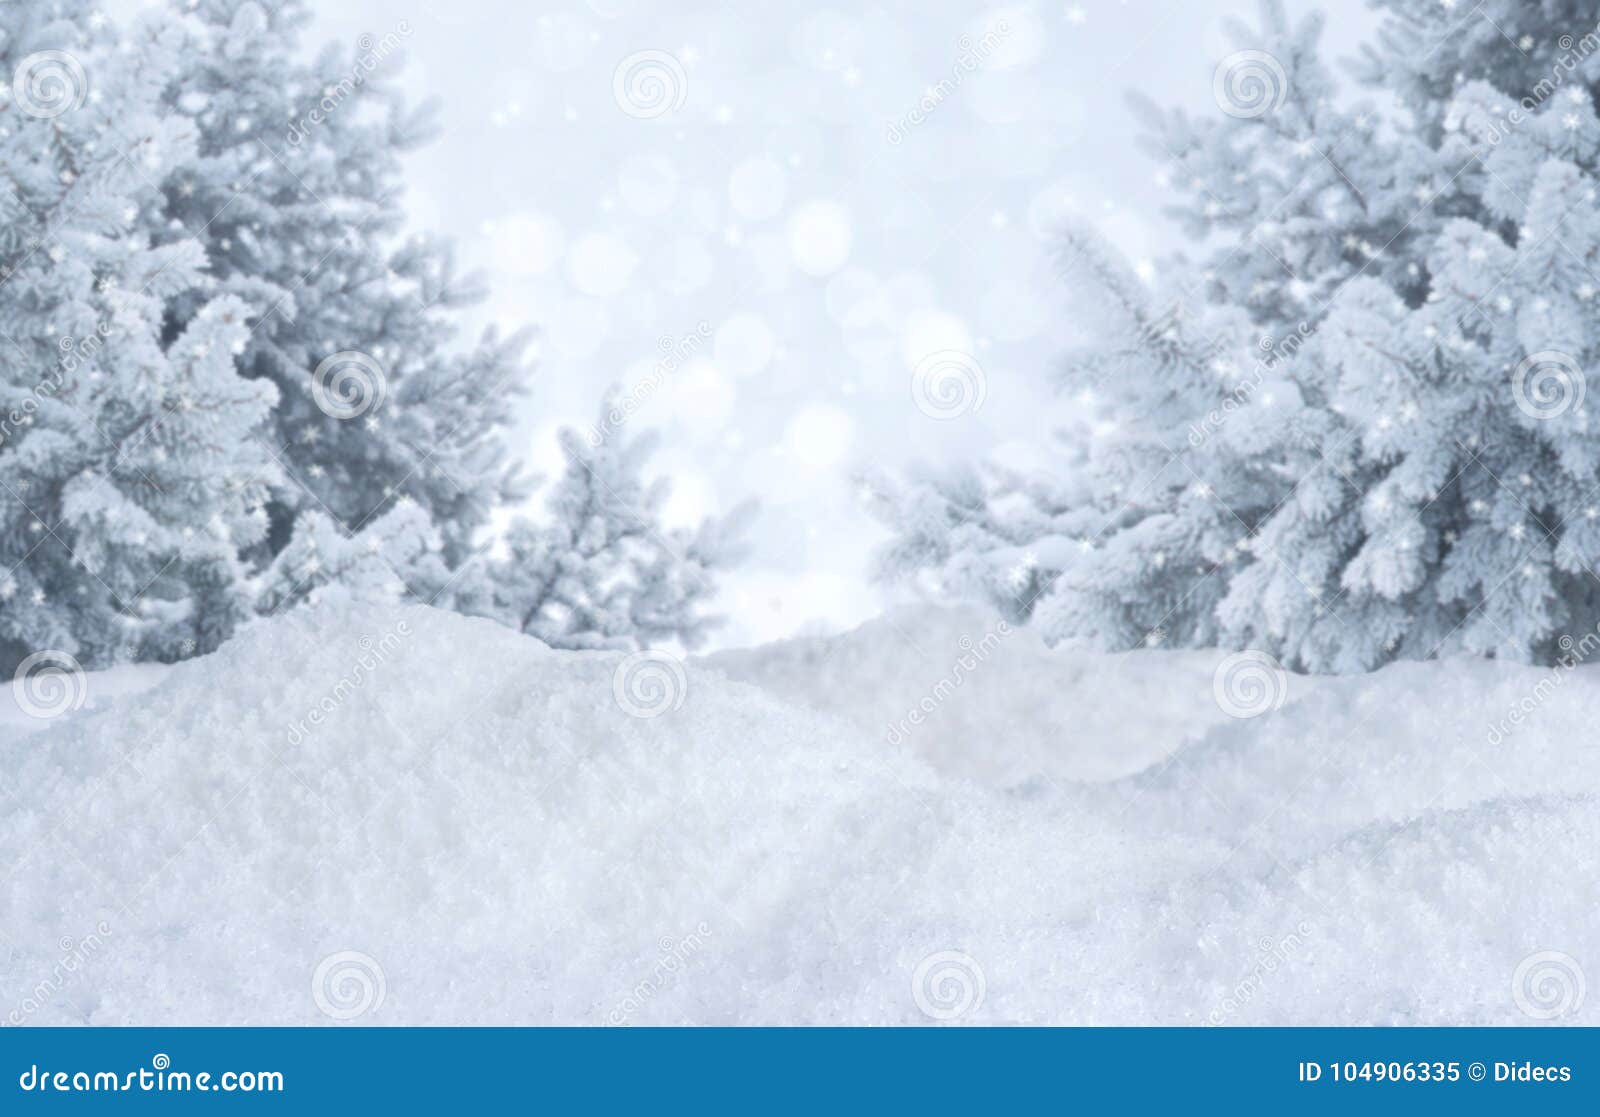 winter abstract blurred background. frosty landscape with pines and snowdrifts